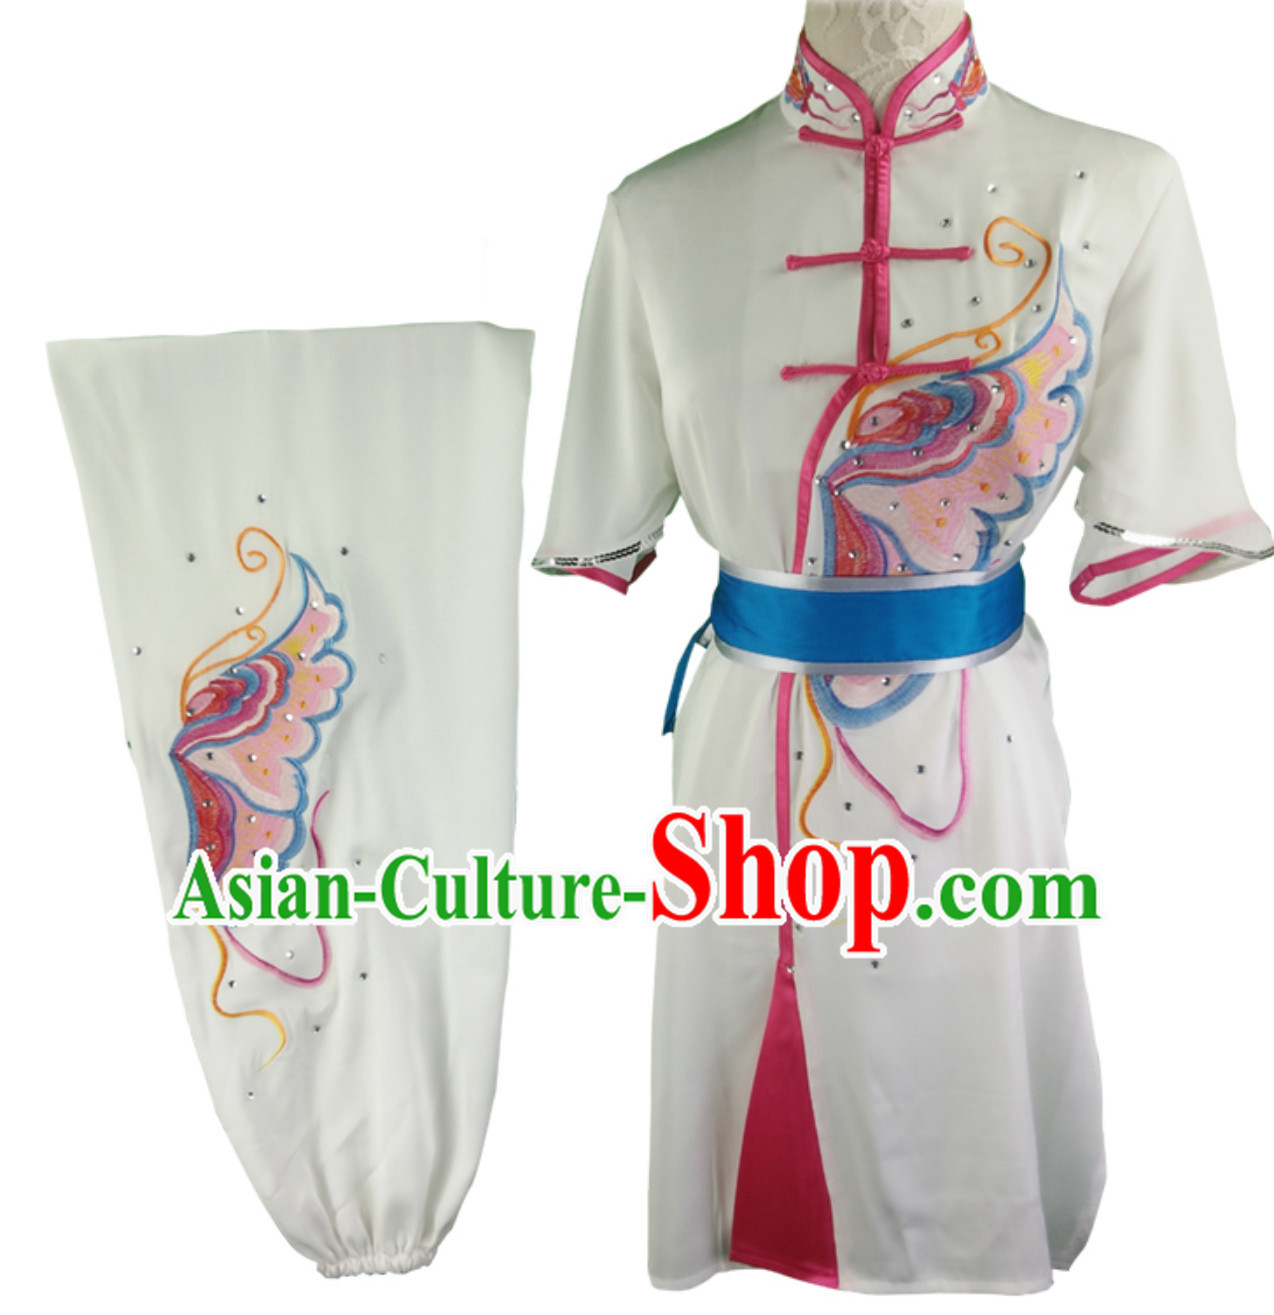 Custom Made Top Mulan Kung Fu Jacket Kung Fu Shirt Kung Fu Suits and Uniforms Chinese Jacket Martial Arts Suits Competition Clothing for Women